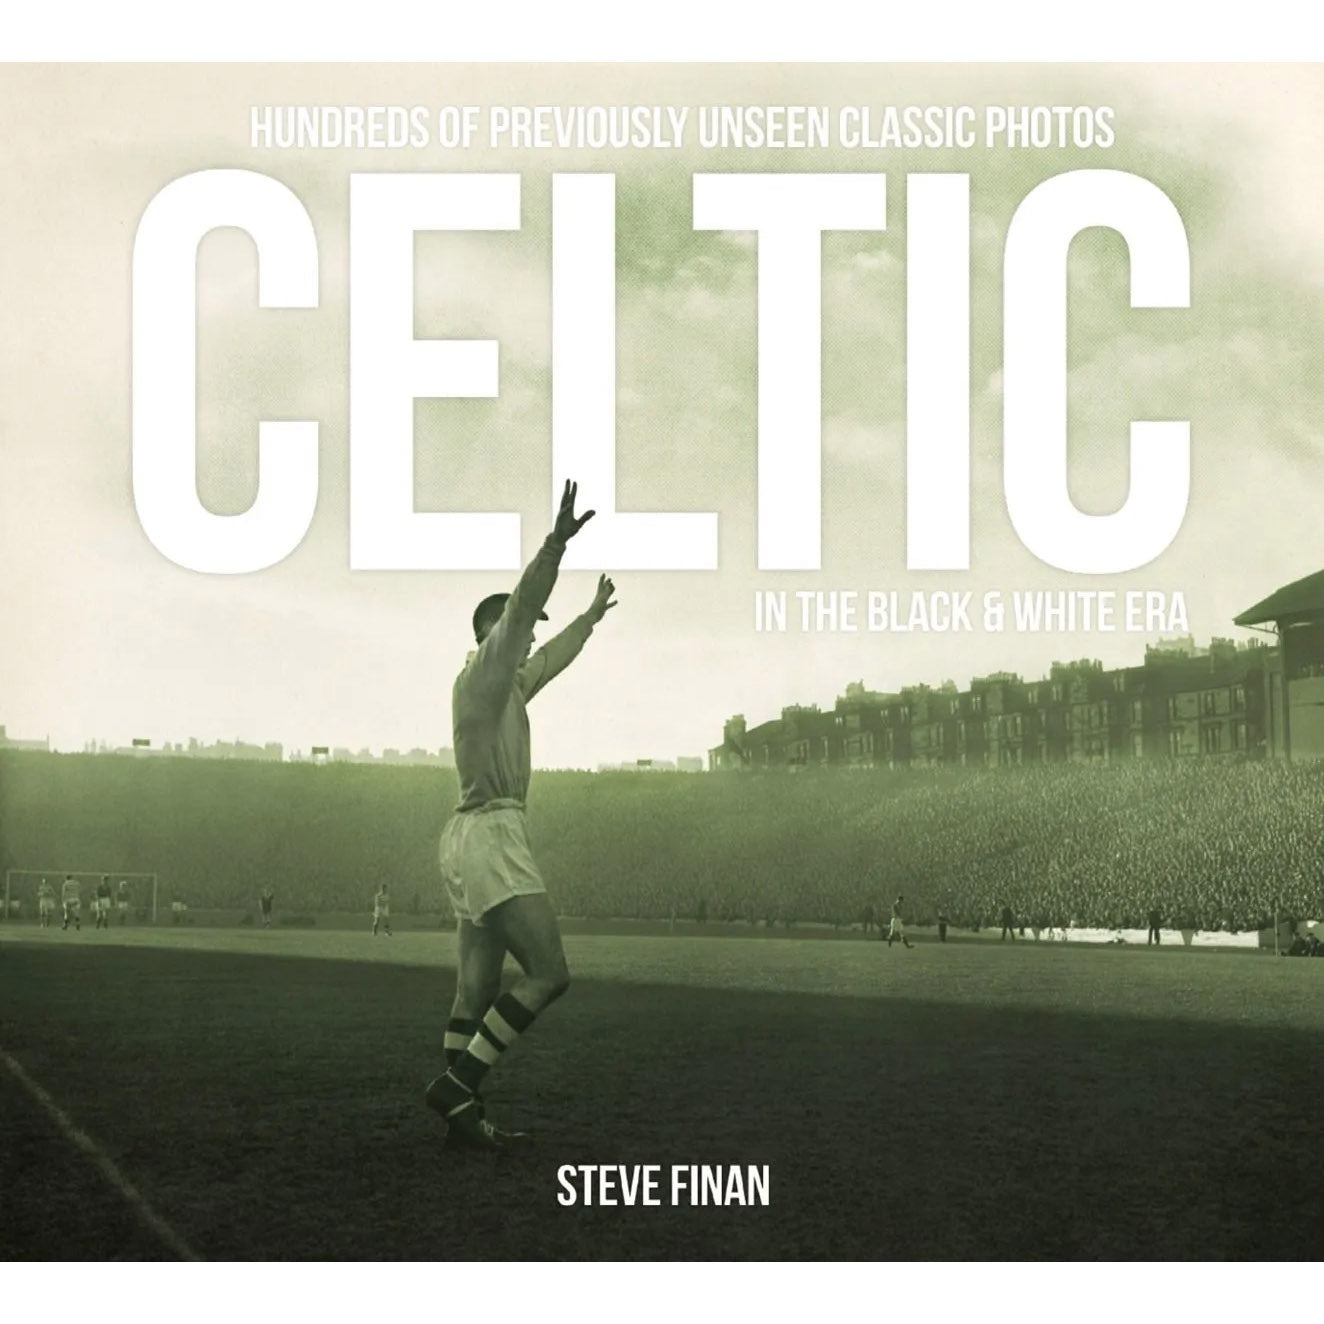 Celtic in the Black & White Era – Hundreds of Previously Unseen Classic Photos